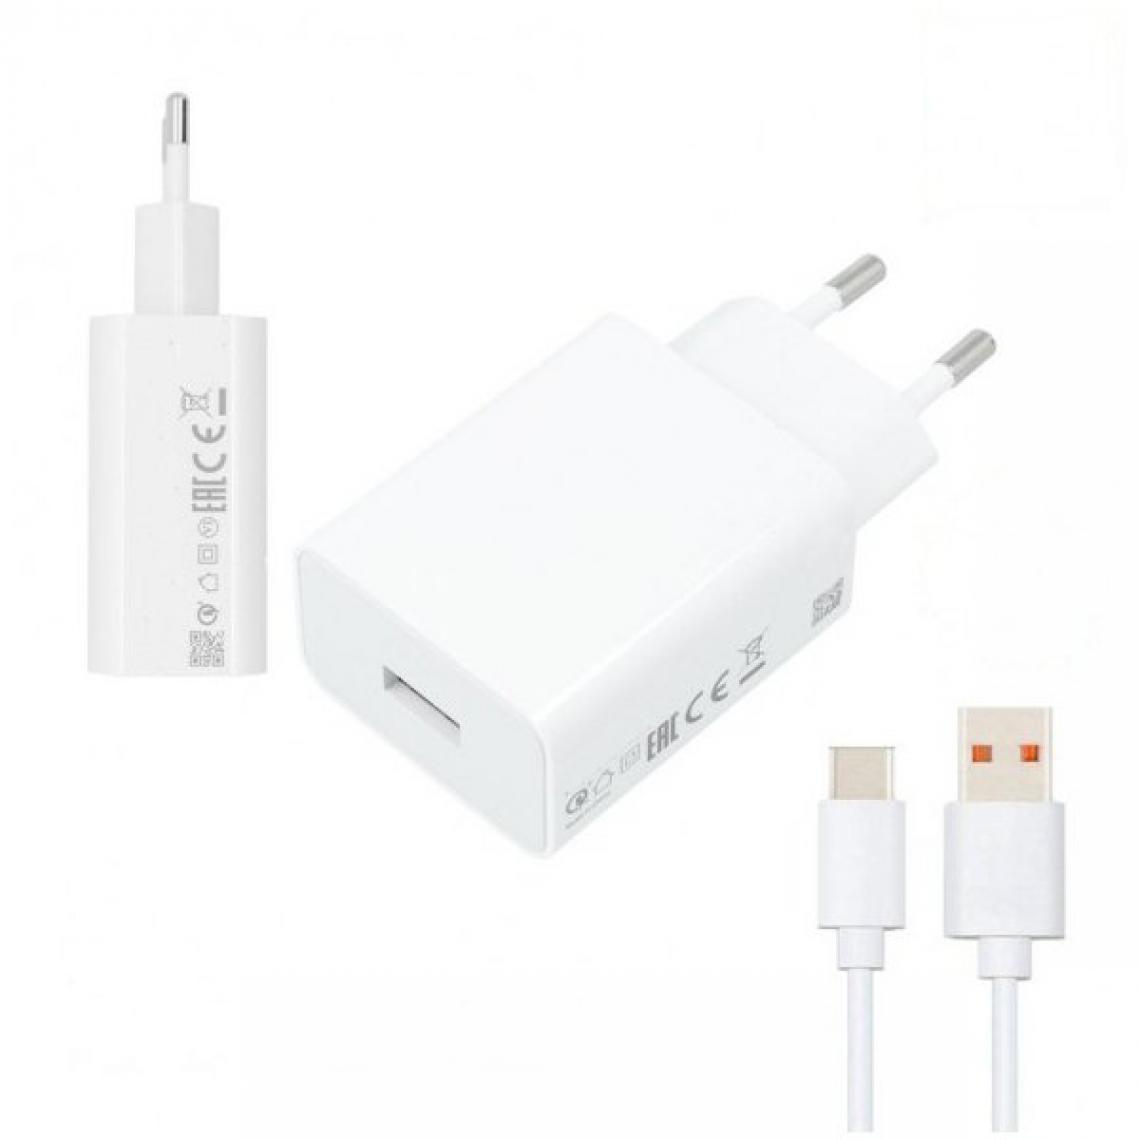 Phonecare - Kit Chargeur Turbo Fast Charge 33W 3A USB + Câble de Charge Turbo Fast Charge 5A Type-C 1M - Xiaomi Redmi Note 9S - Autres accessoires smartphone